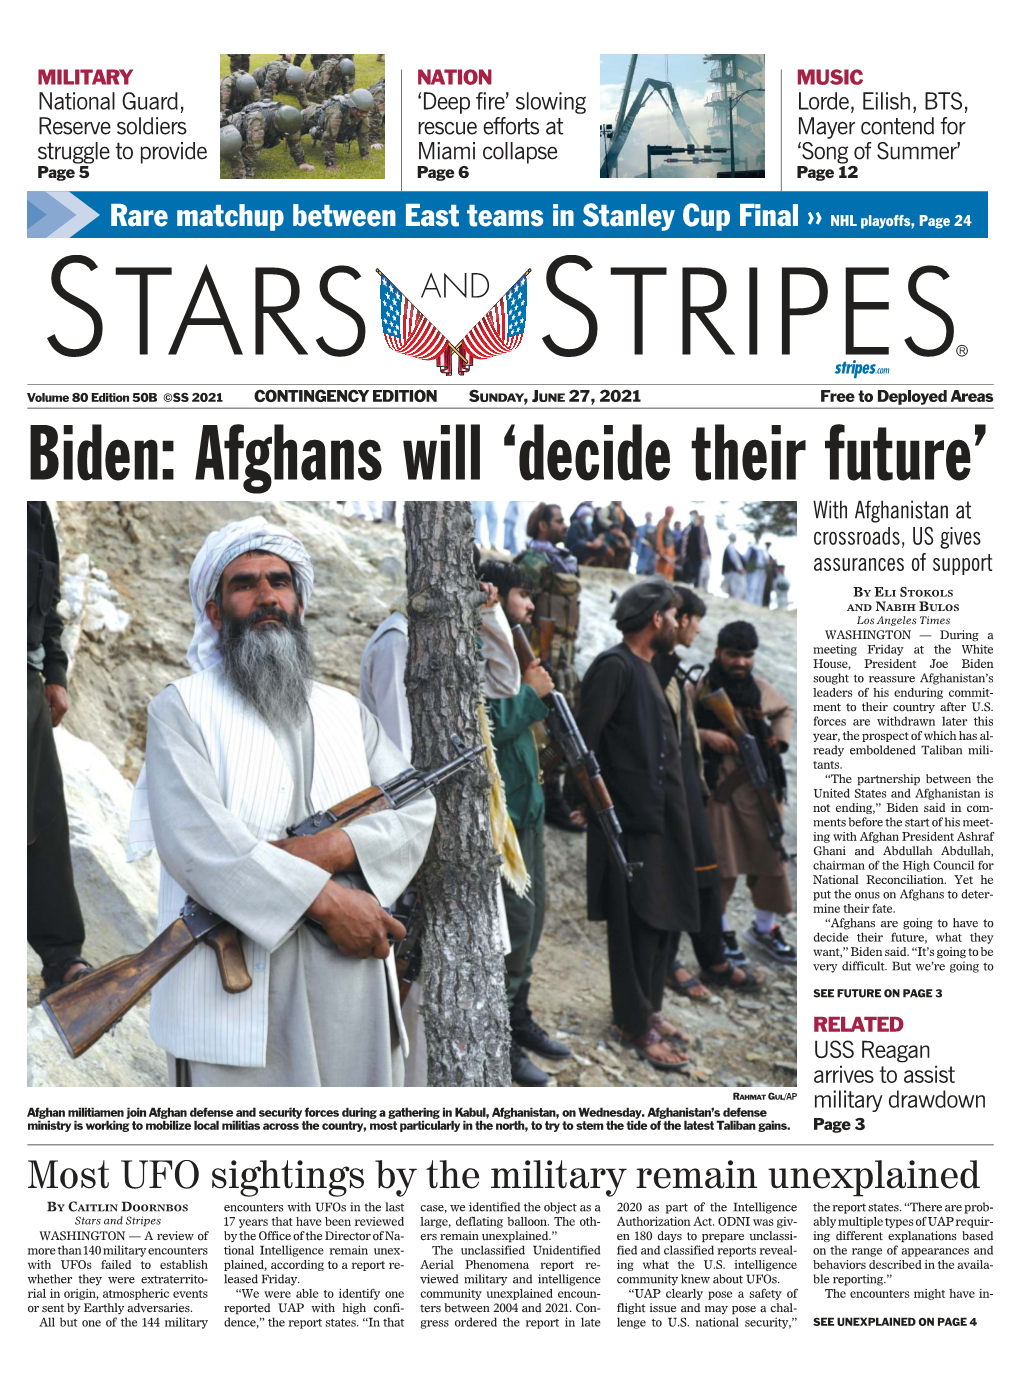 Biden: Afghans Will ‘Decide Their Future’ with Afghanistan at Crossroads, US Gives Assurances of Support